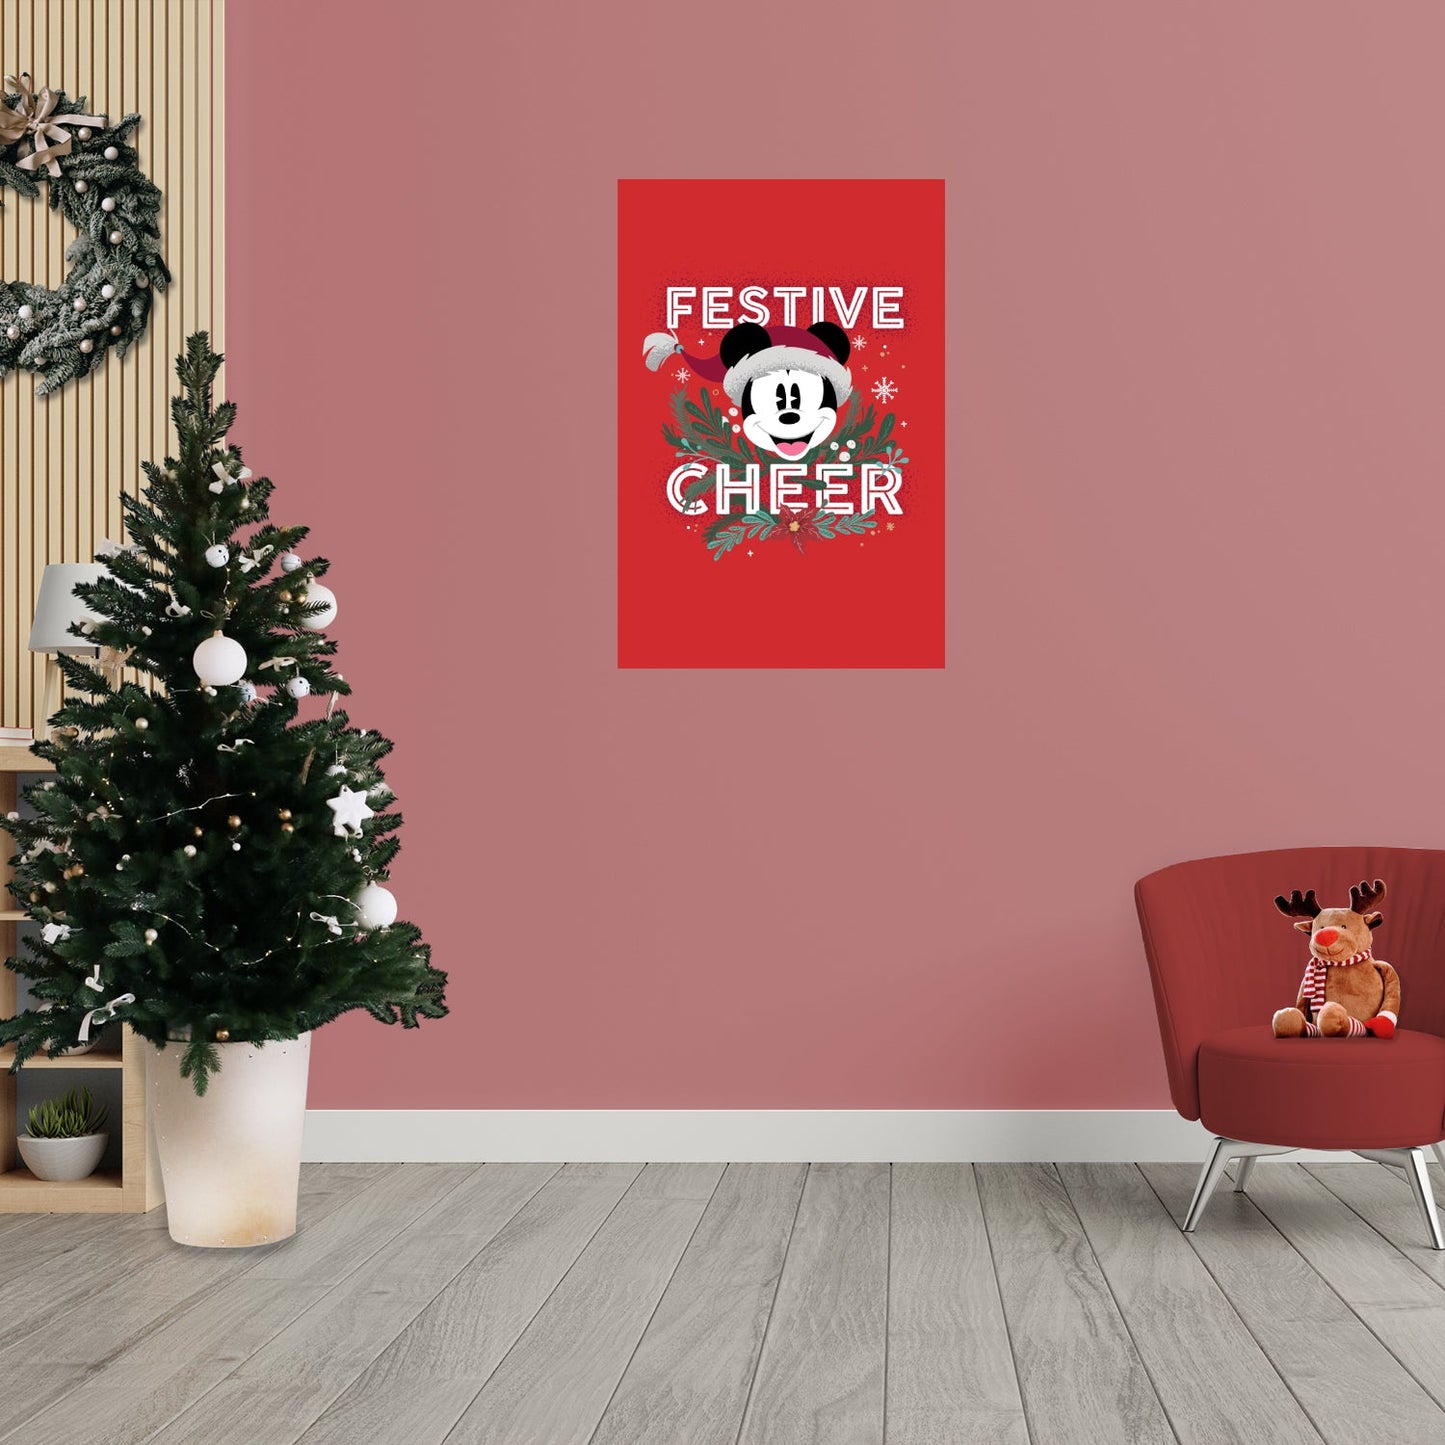 Mickey and Friends Festive Cheer: Mickey Mouse Festive Cheer Mural - Officially Licensed Disney Removable Adhesive Decal